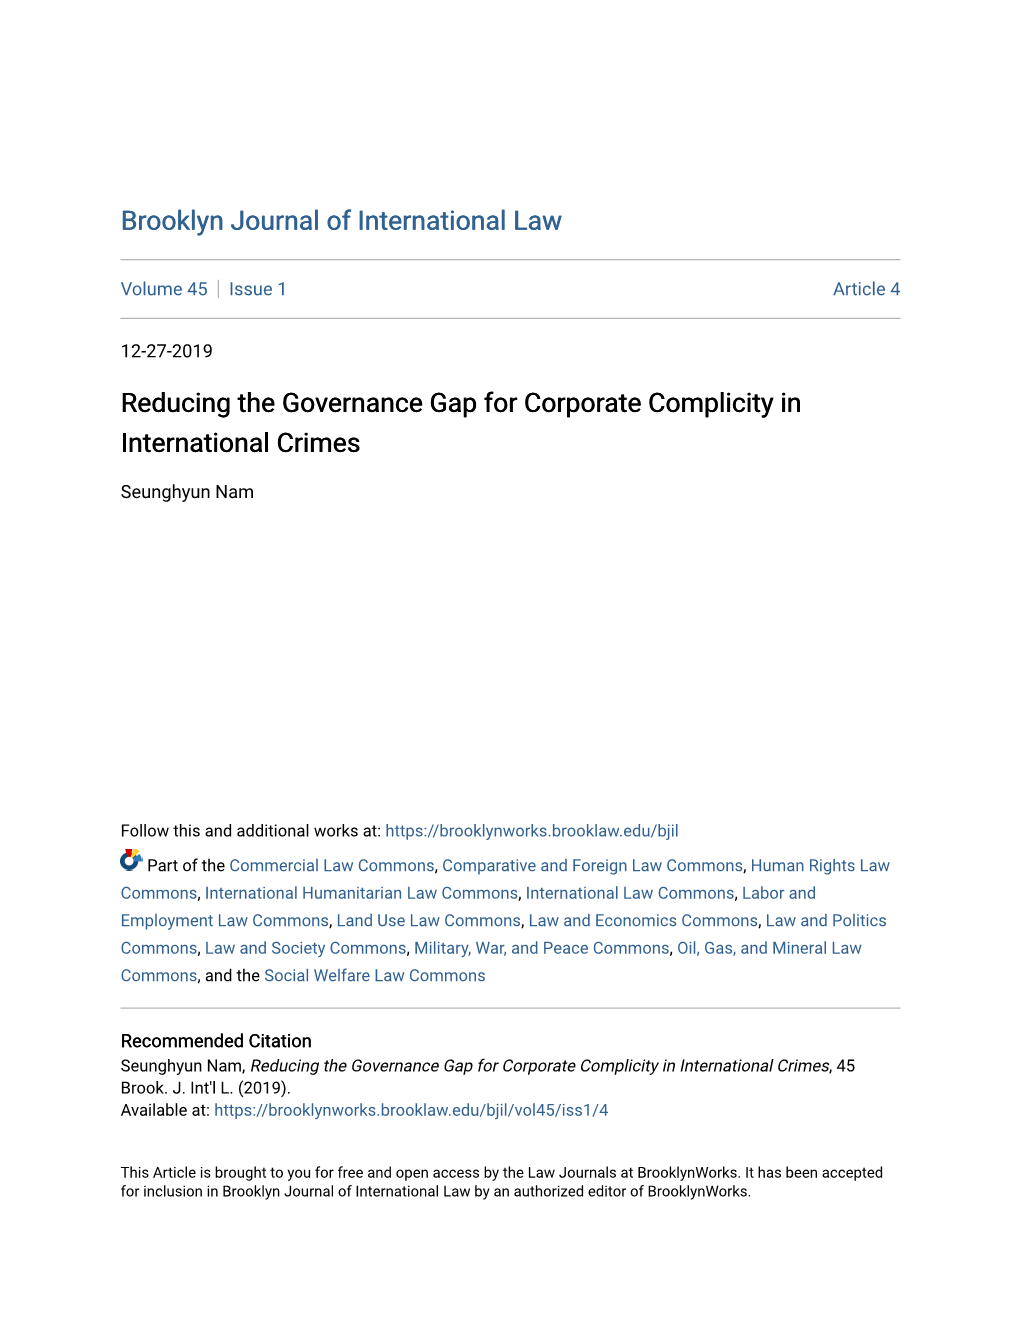 Reducing the Governance Gap for Corporate Complicity in International Crimes